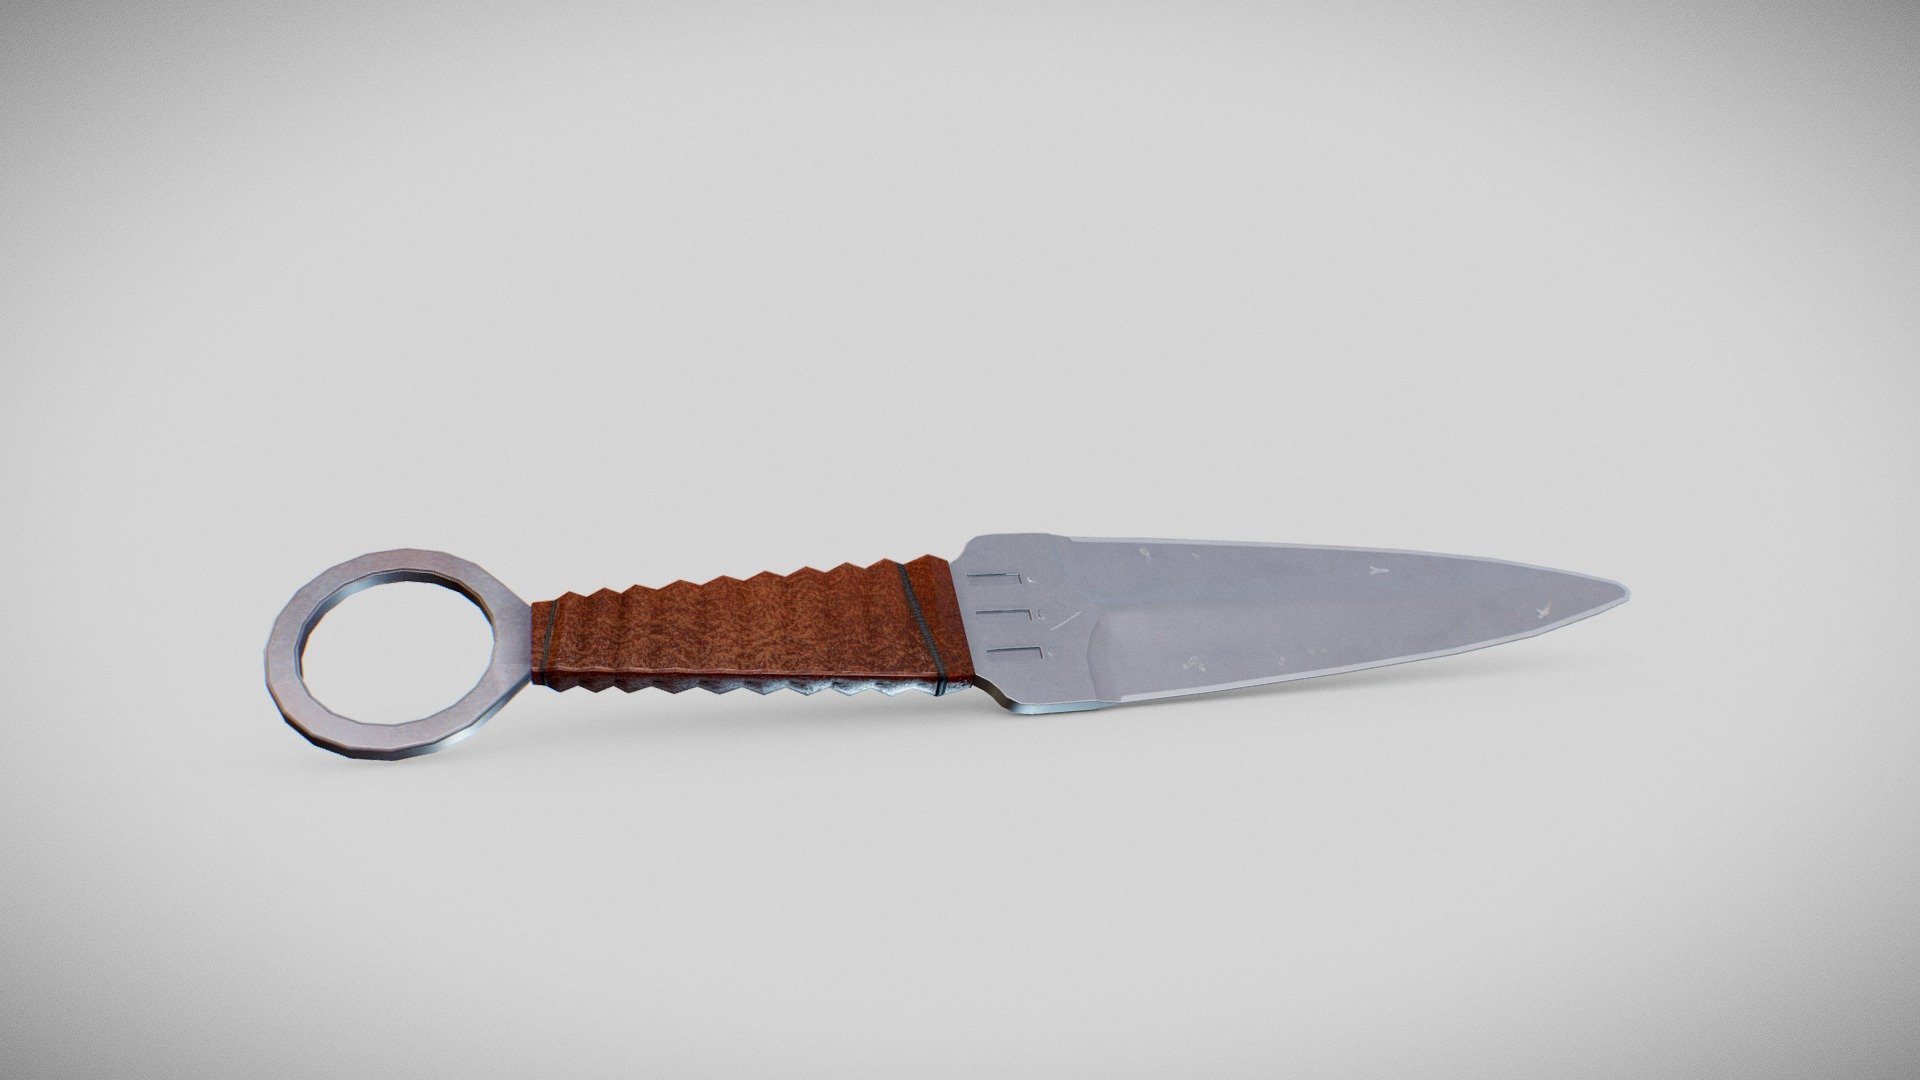 Throwing Knife Download Free 3d Model By Michele Passerino Michele Passerino 30e088c Sketchfab - how to throw a knife in roblox